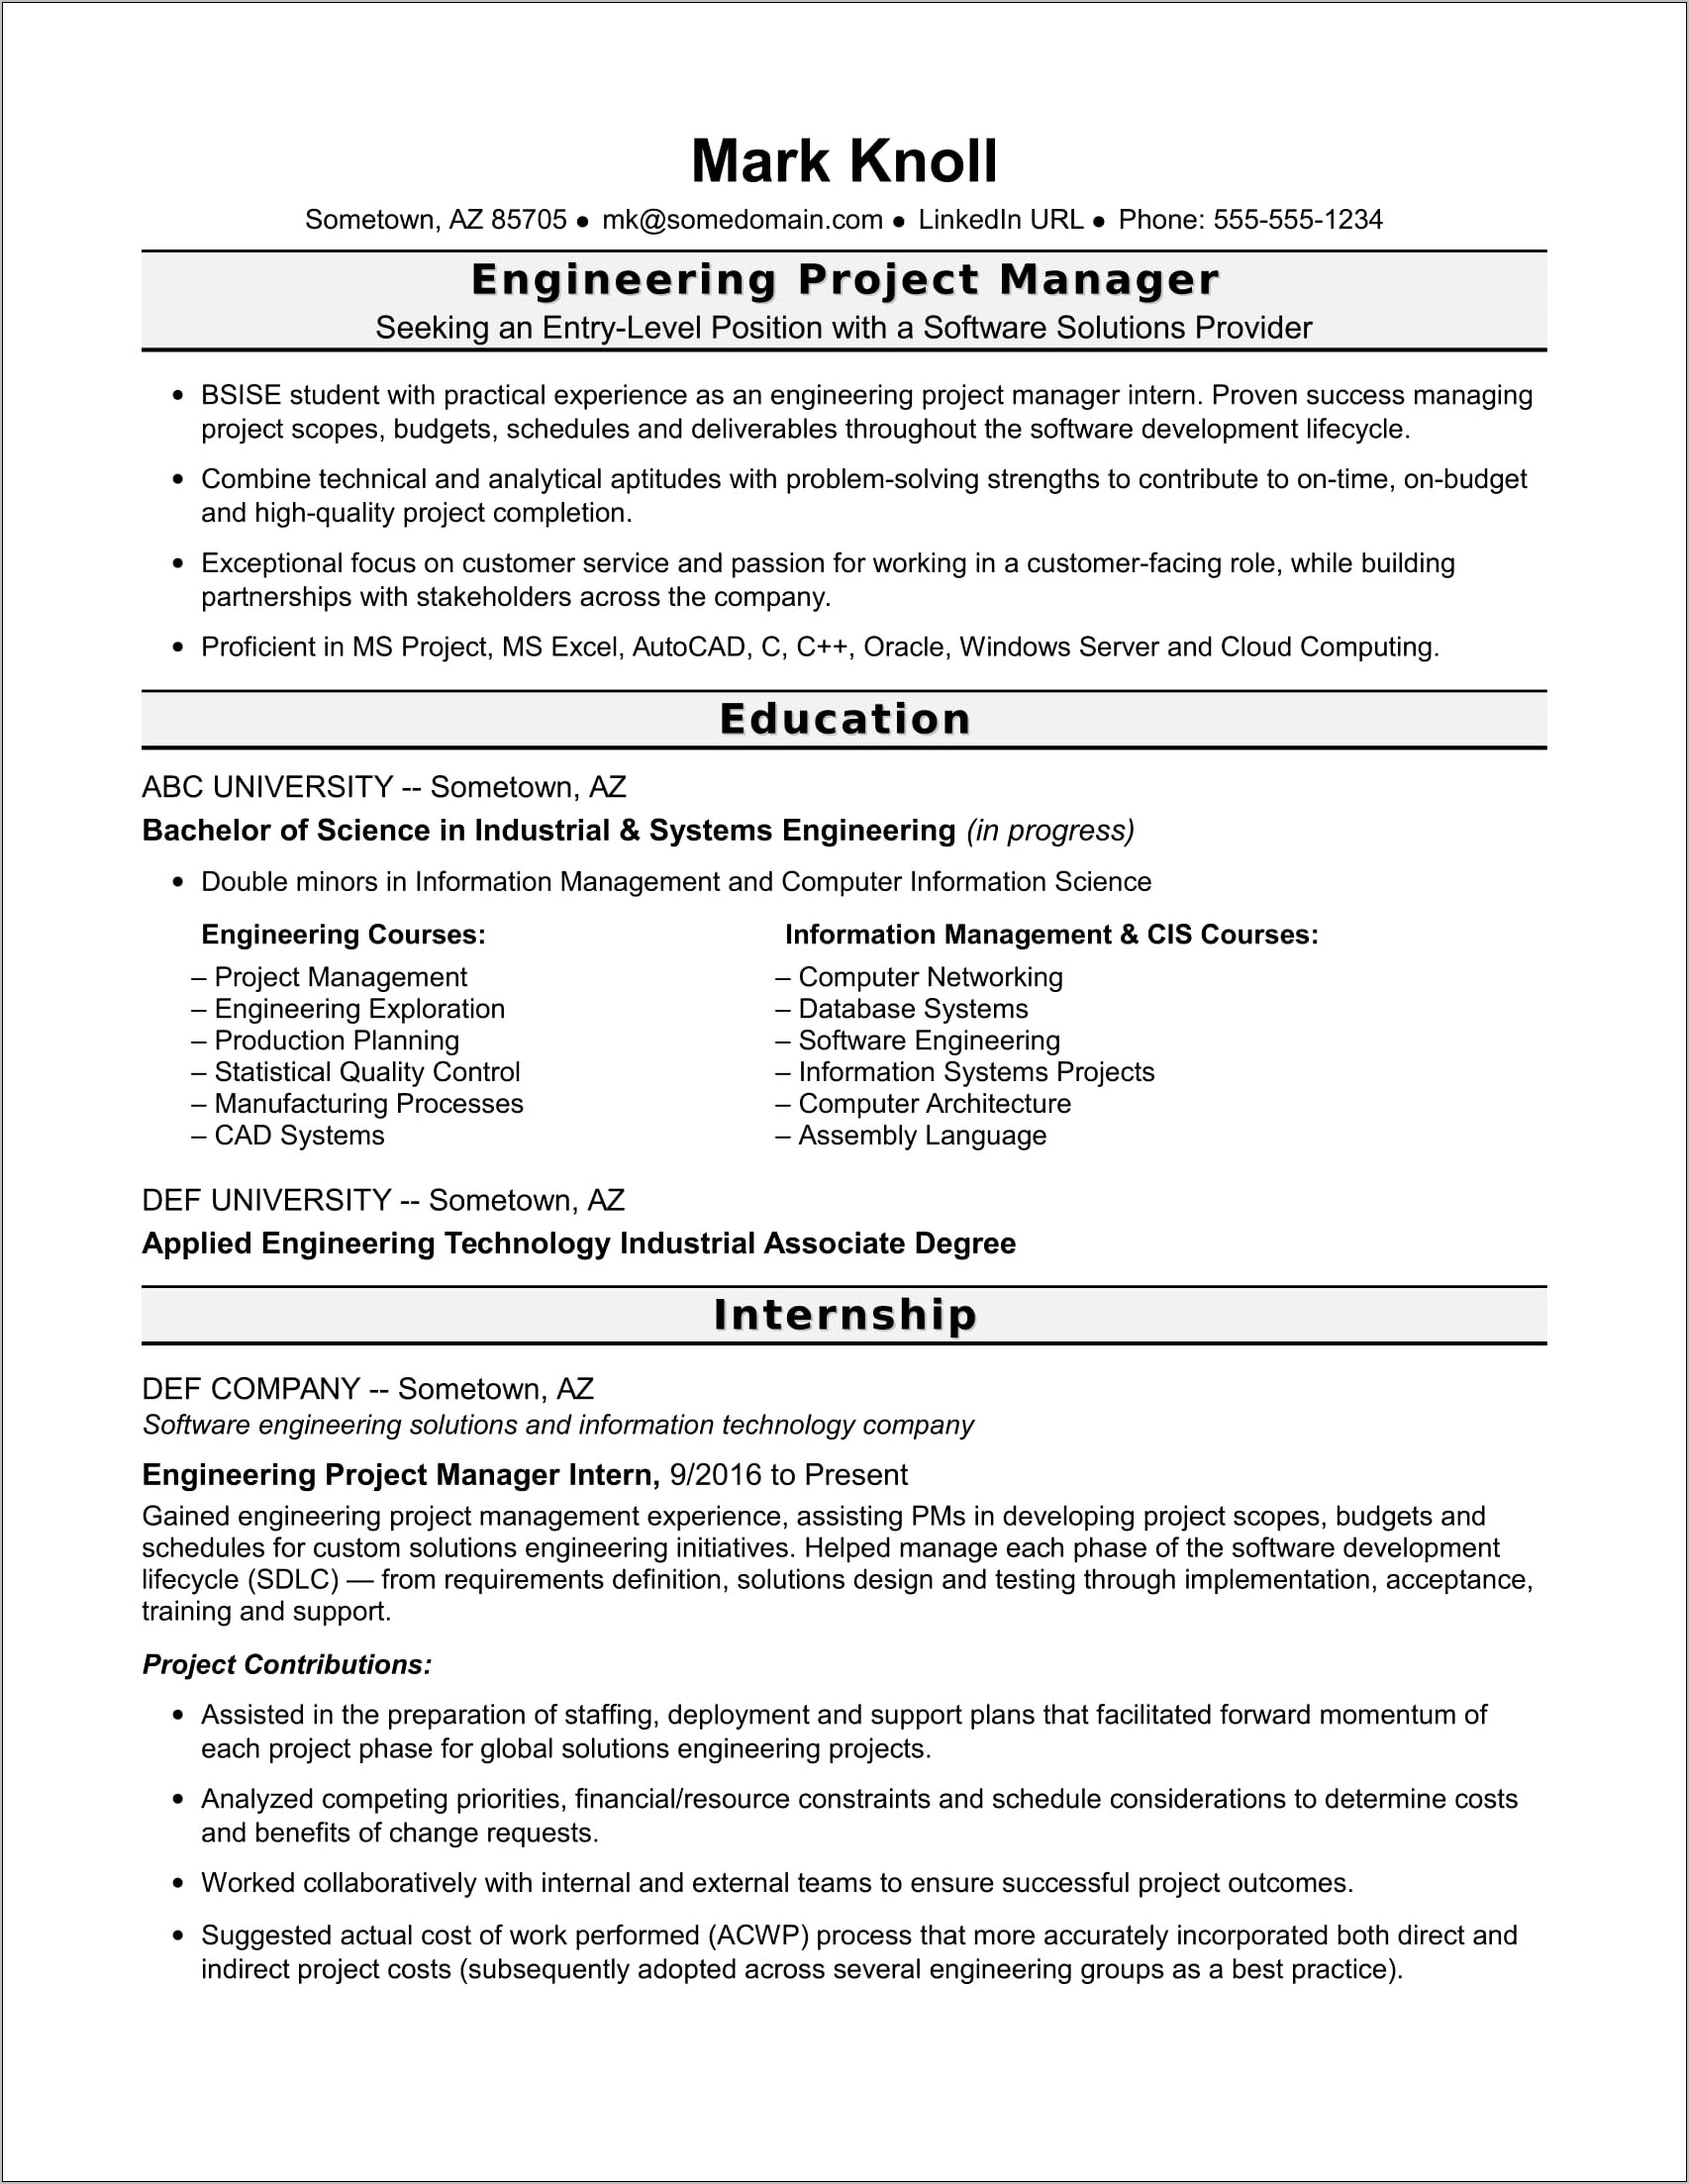 Can You Put Projects In Progress On Resume